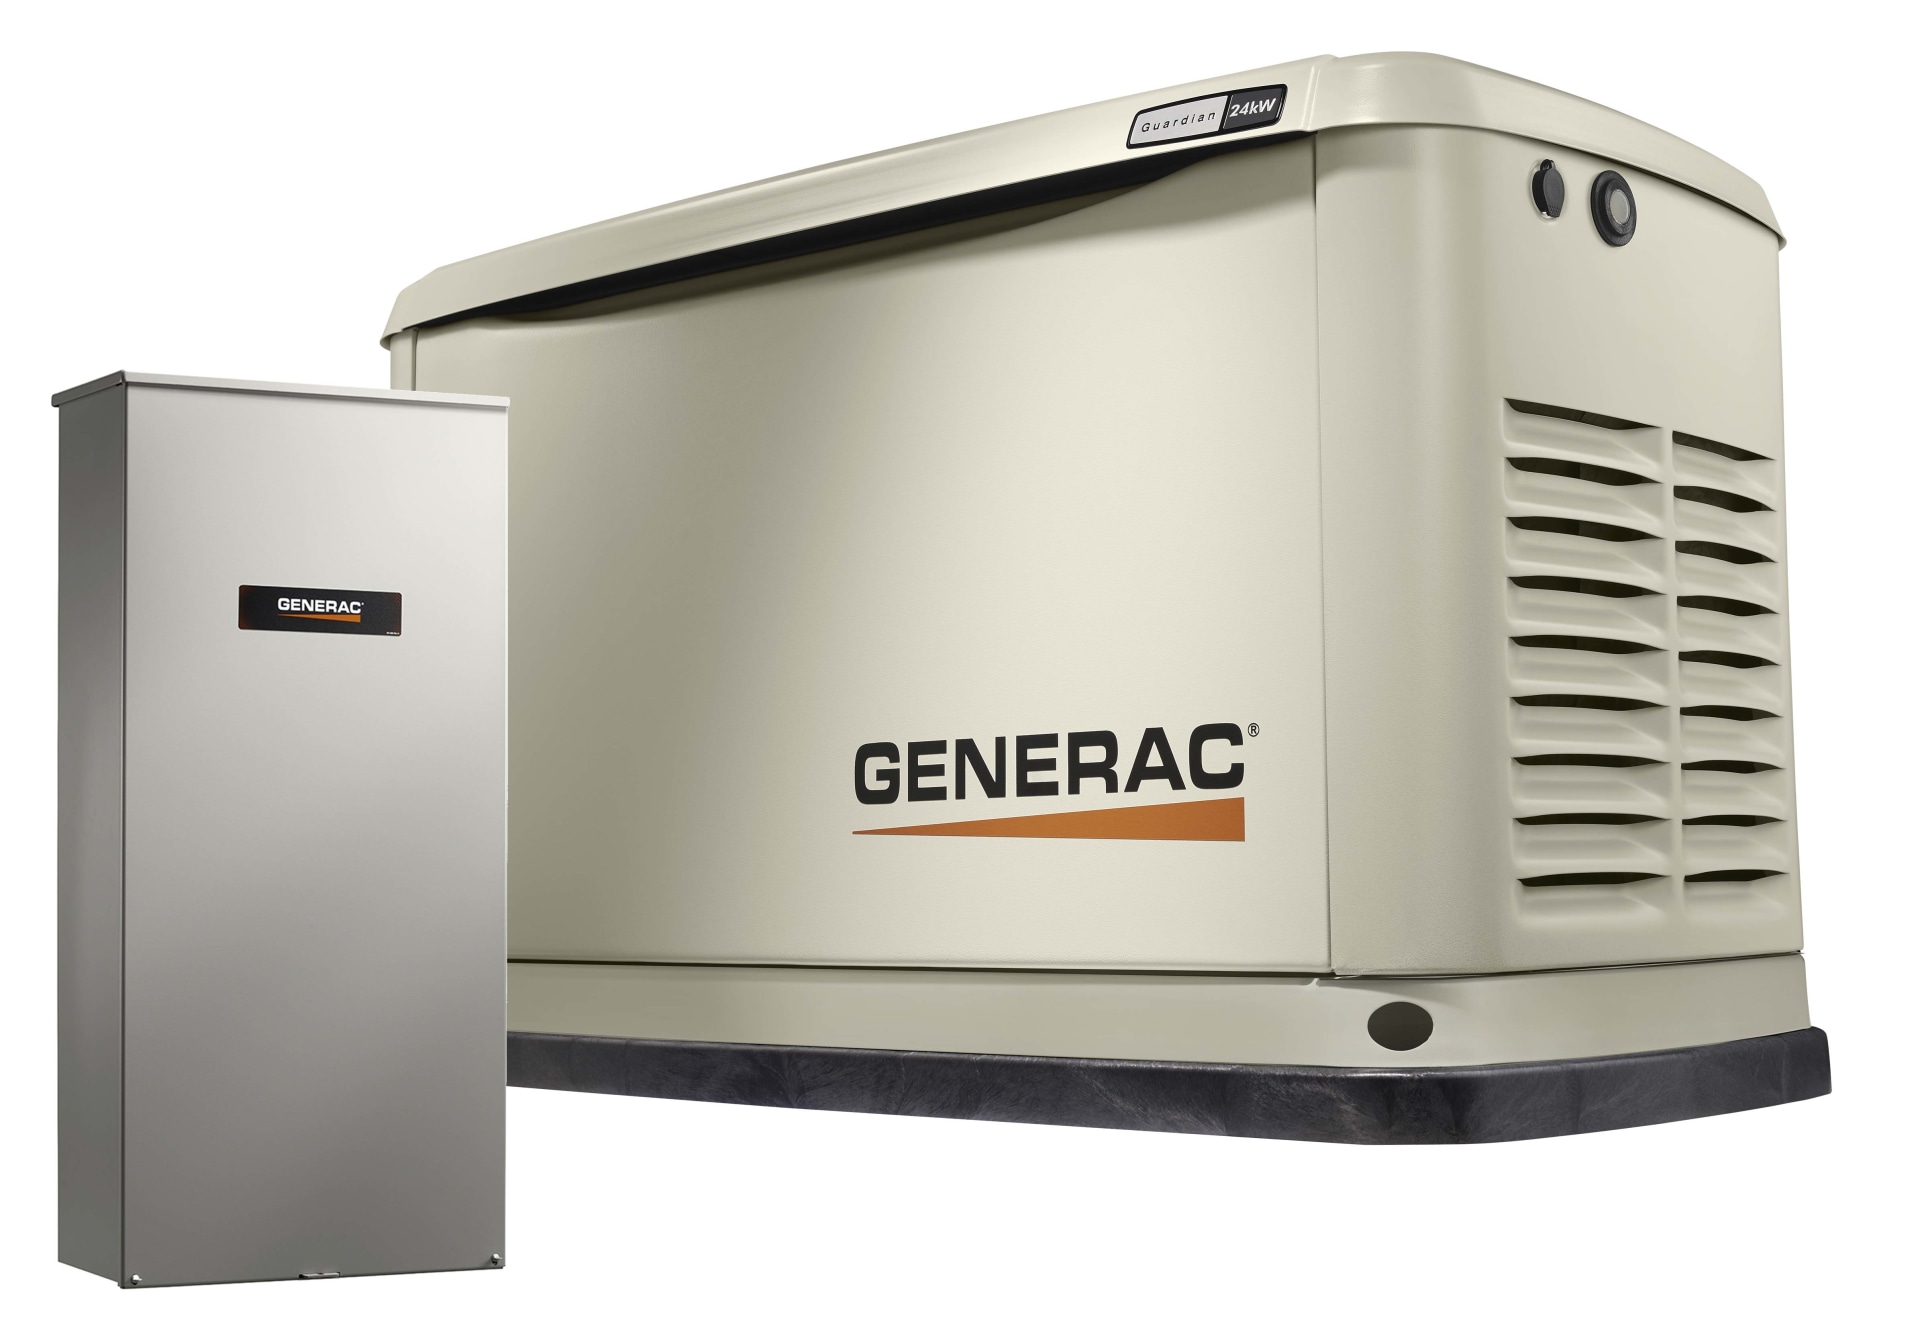  Generac 7210 24kW Whole Home Standby Generator